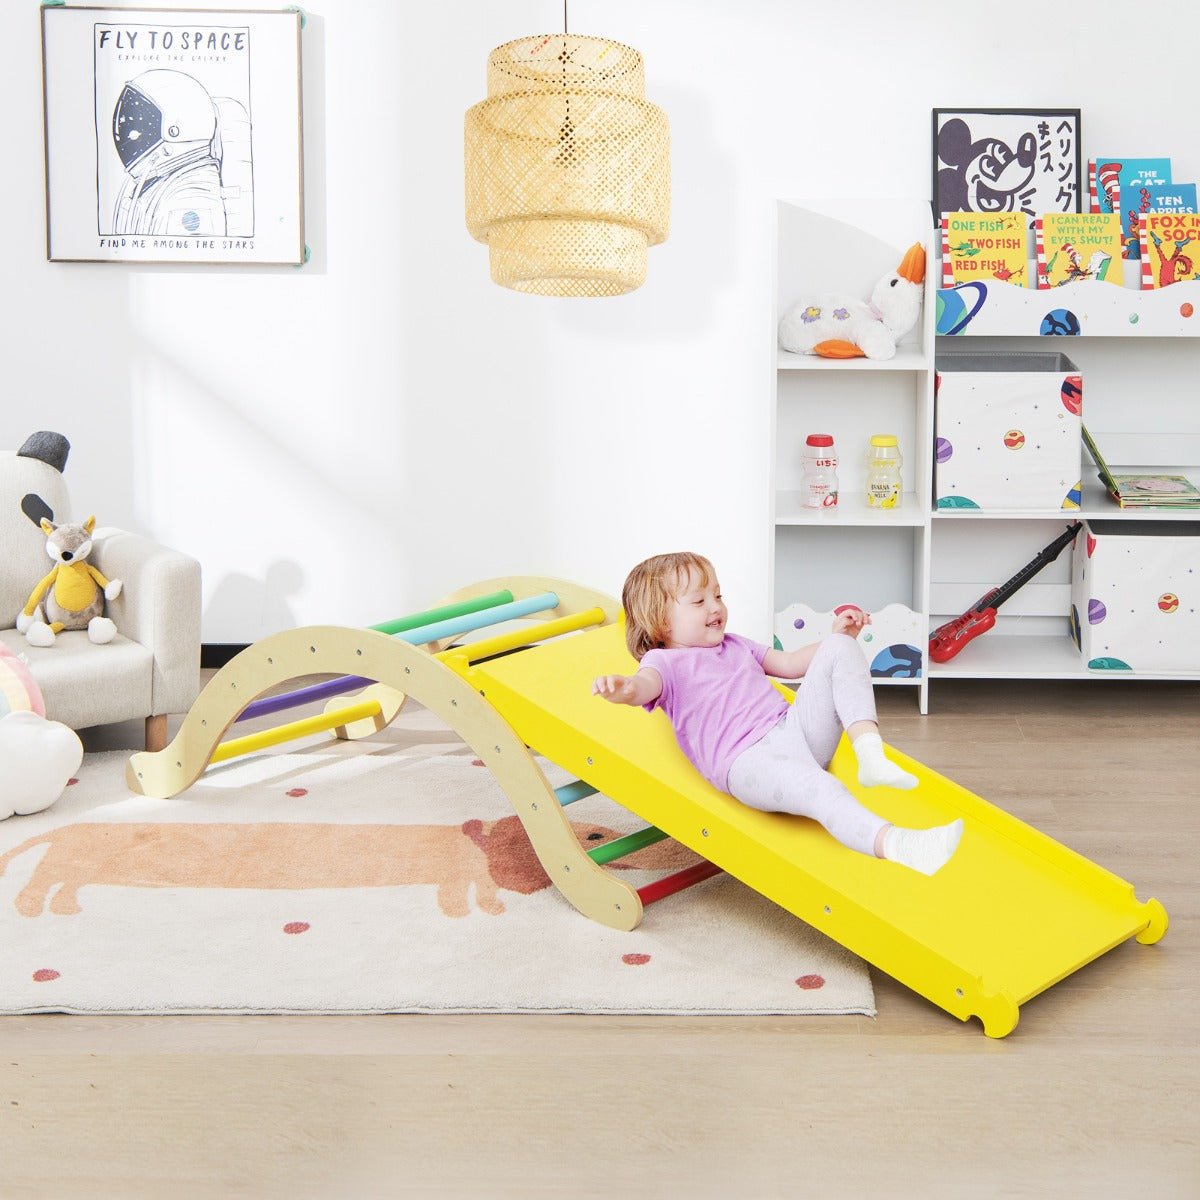 Imagination Soars with Our Multicolour Playset